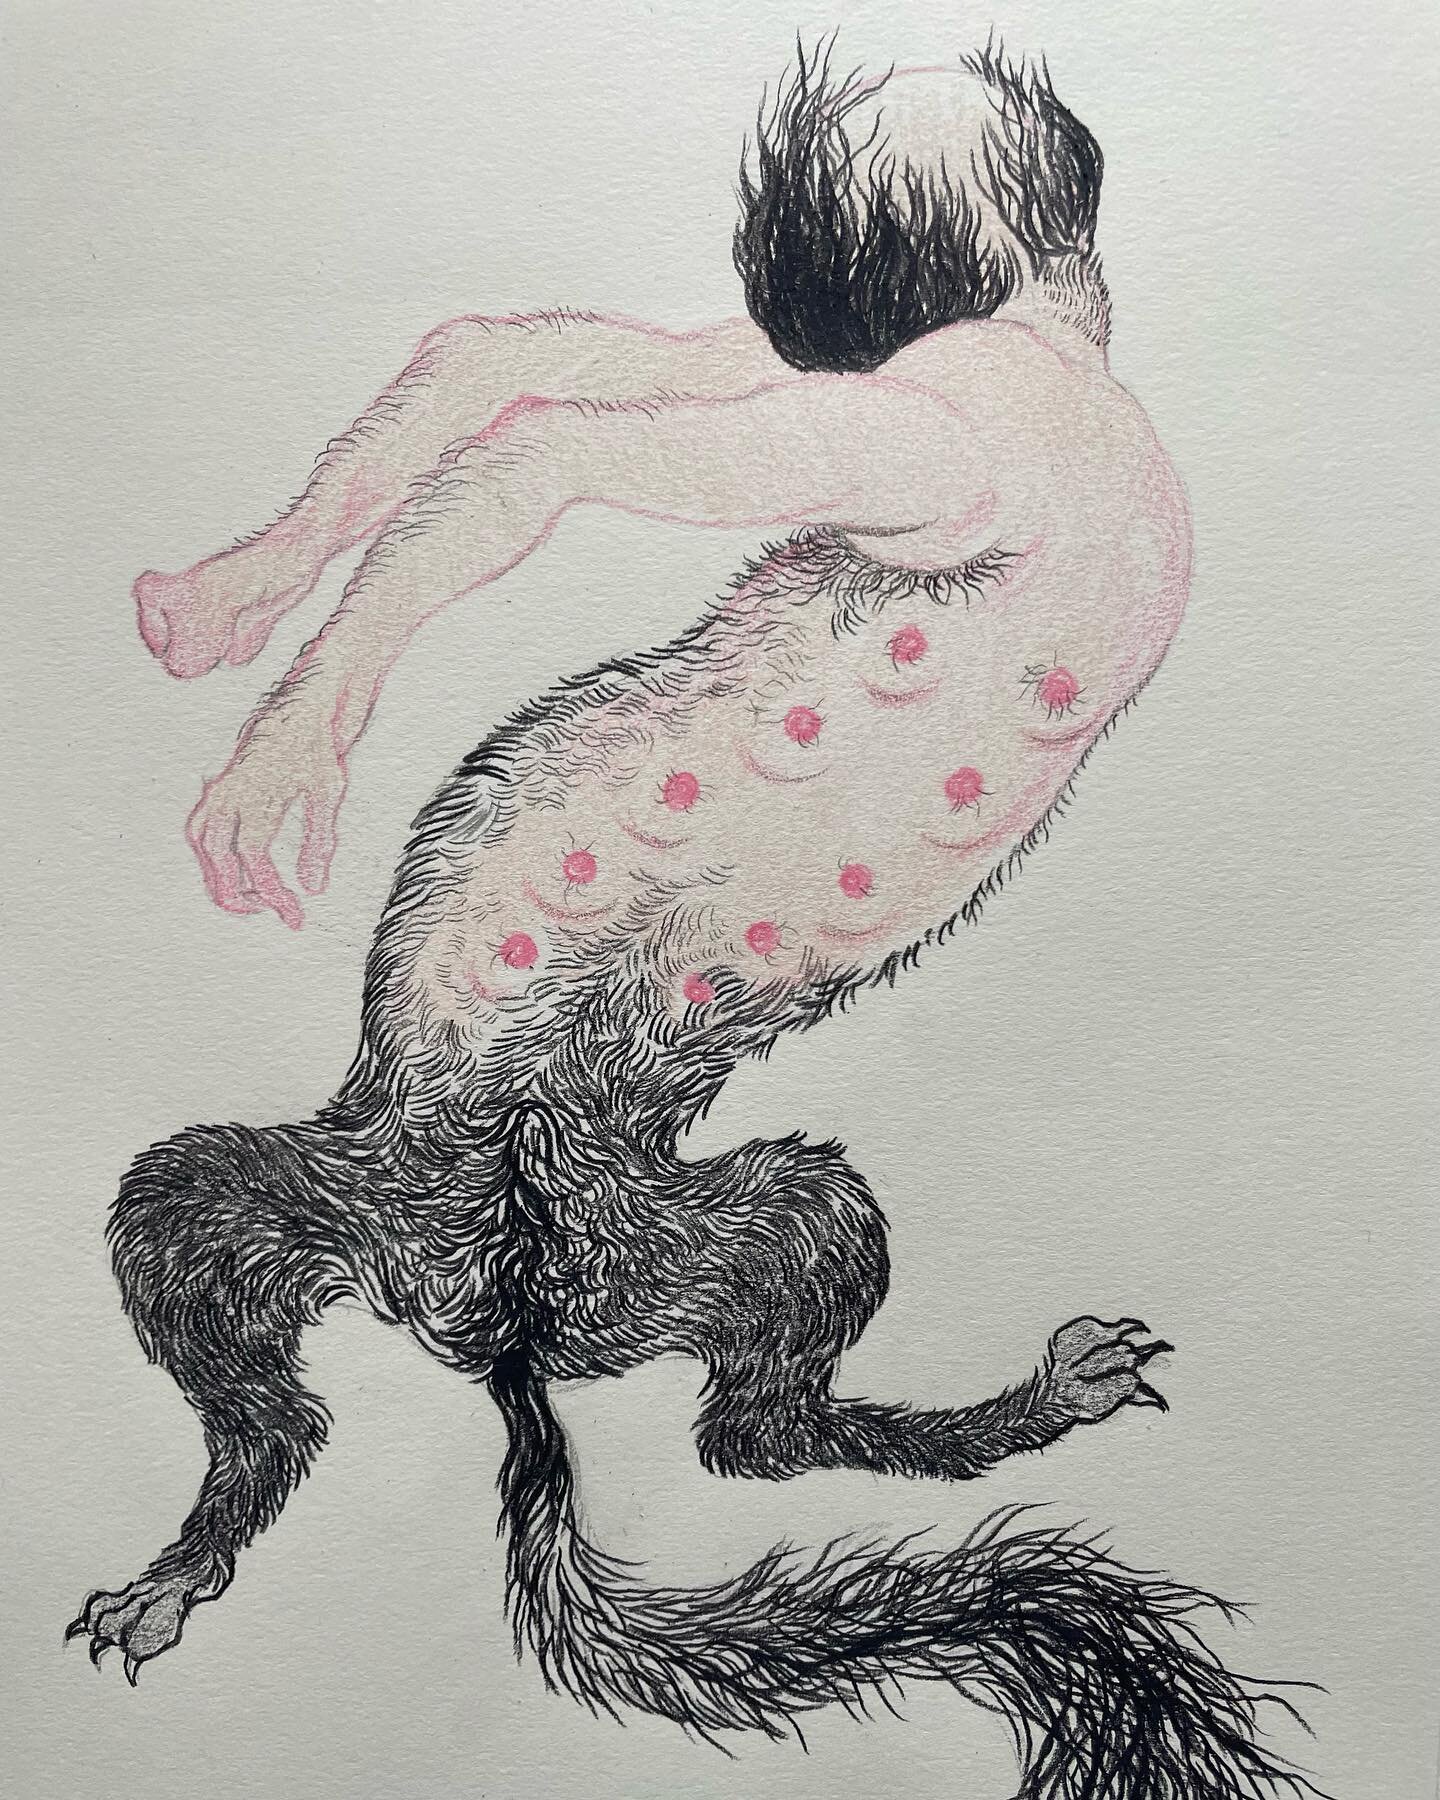 Luna Rosa. A drawing from last night during the full moon. Have been having some pretty intense dysphoria; every so often my insurance decides I&rsquo;m out of refills for like a month and l&rsquo;m just randomly and suddenly off T and it feels reall